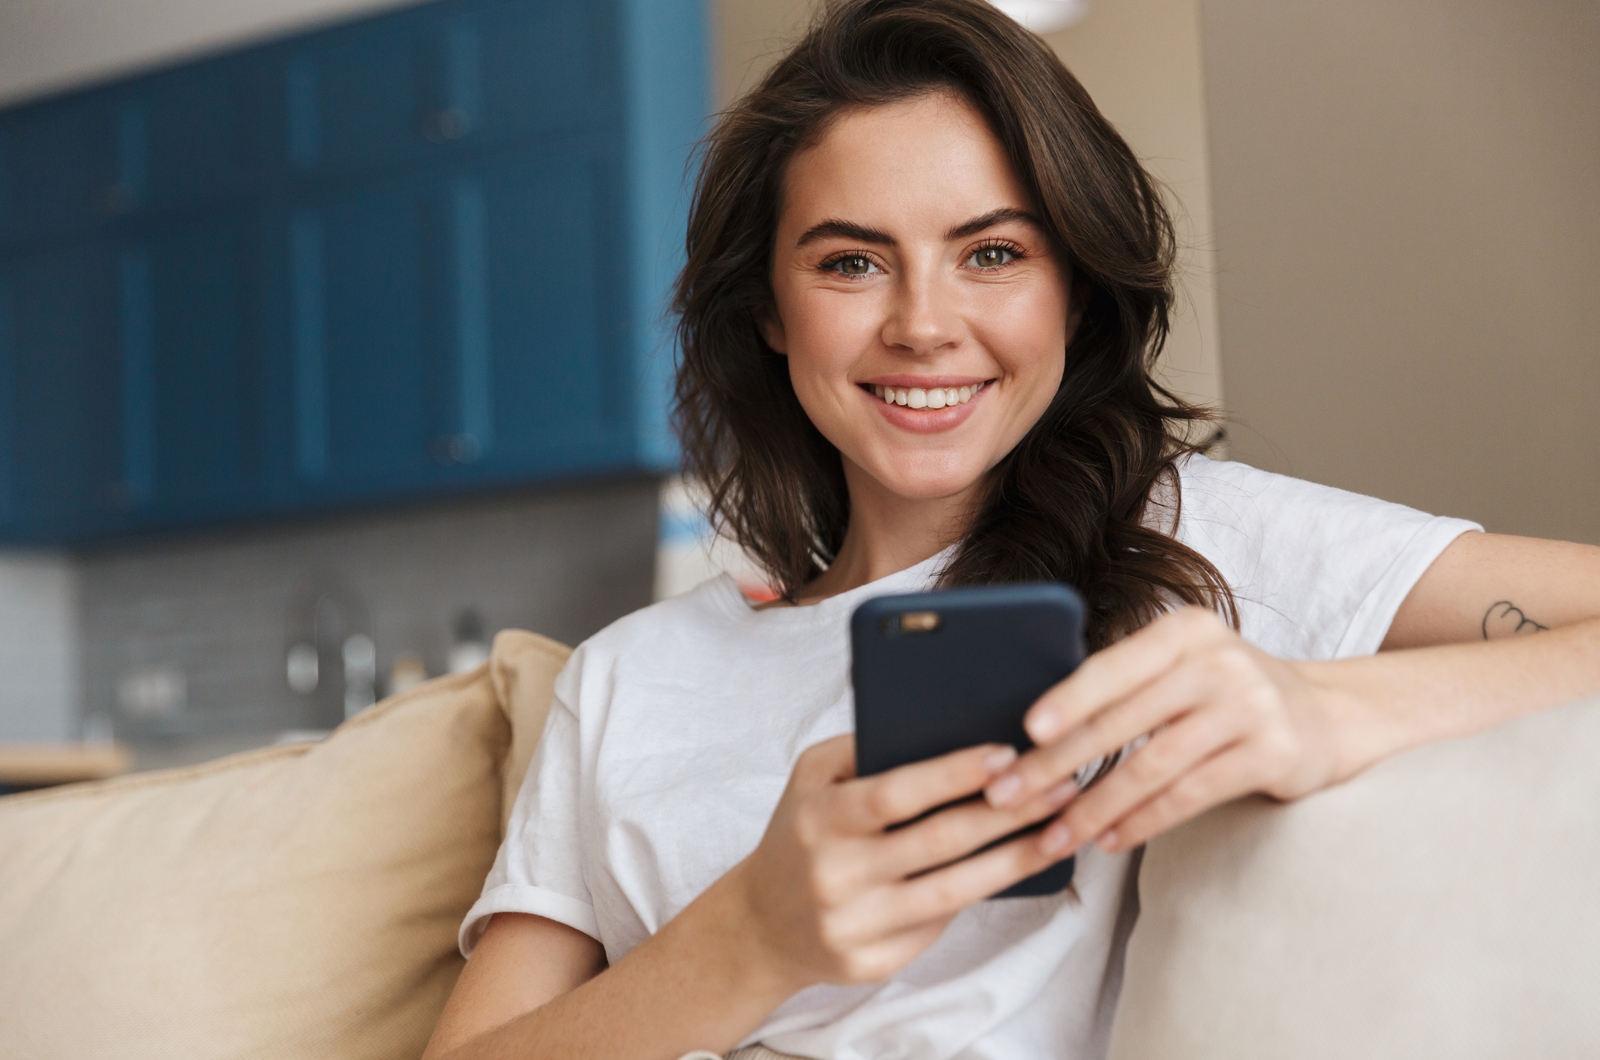 How To Text Your Crush Without Being Boring: Tips & Lines